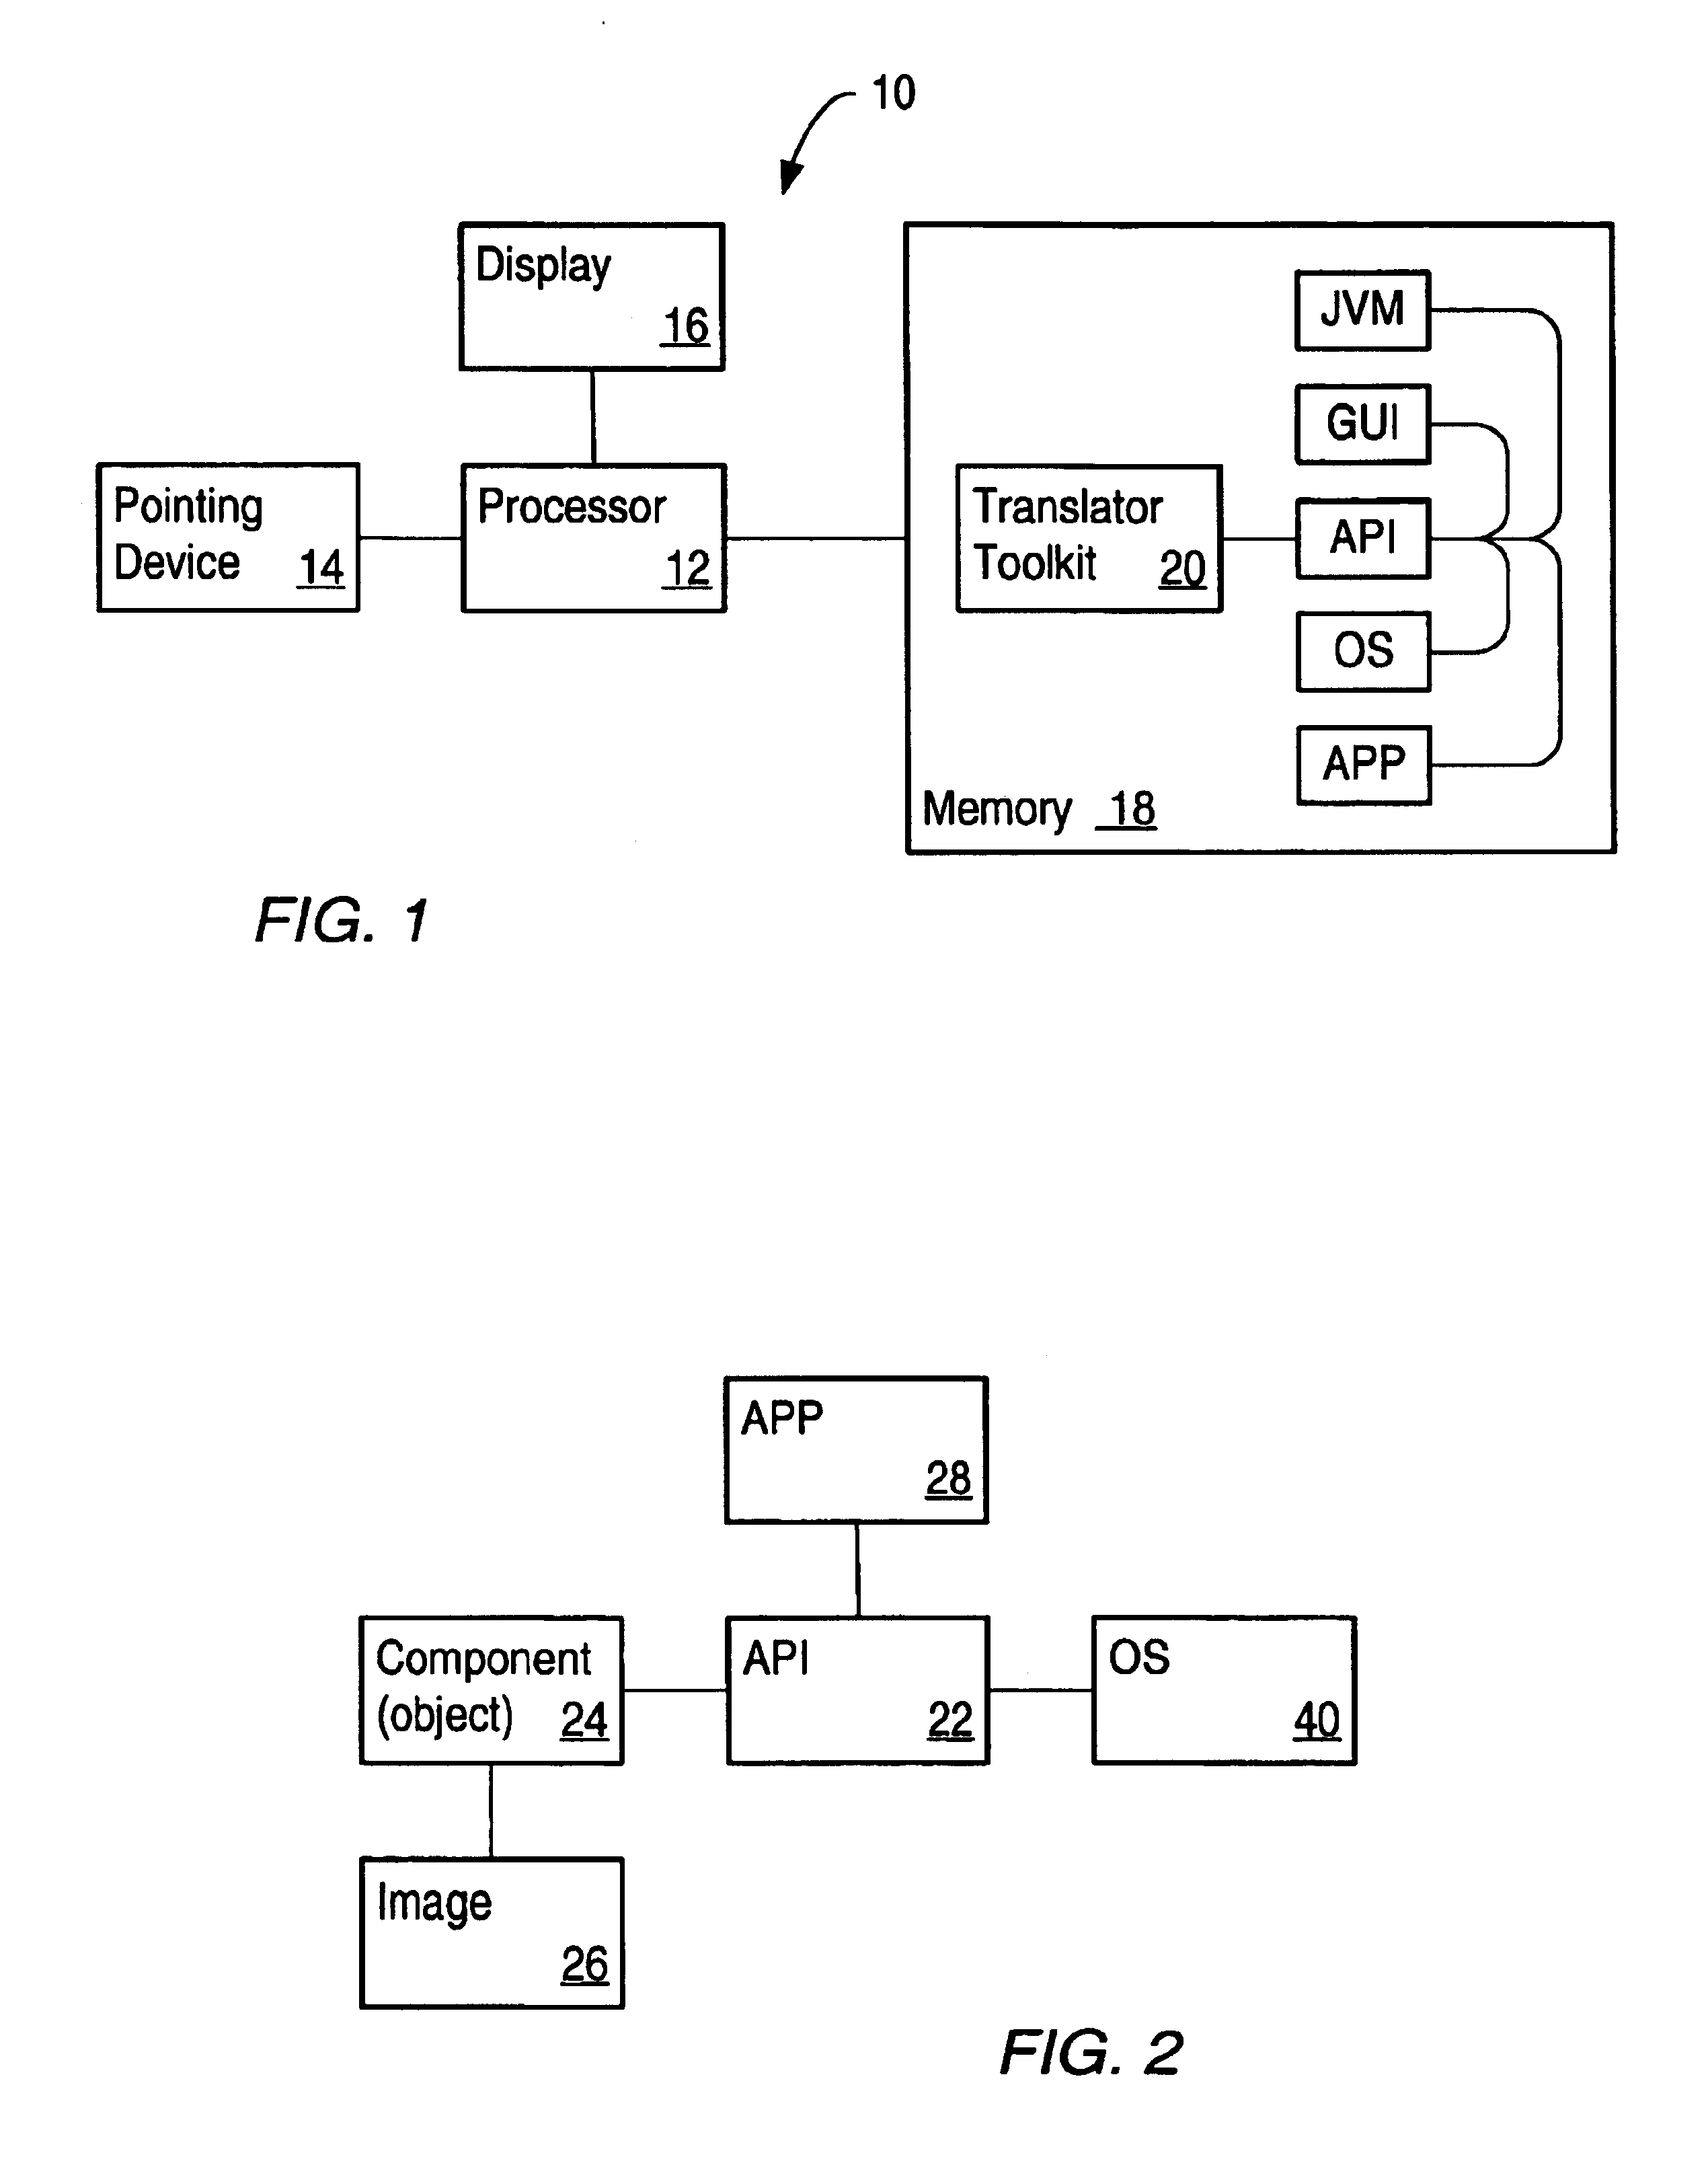 Application program interface that can maintain similar look and feel of a displayed image regardless of whether the interface is platform dependent or platform independent